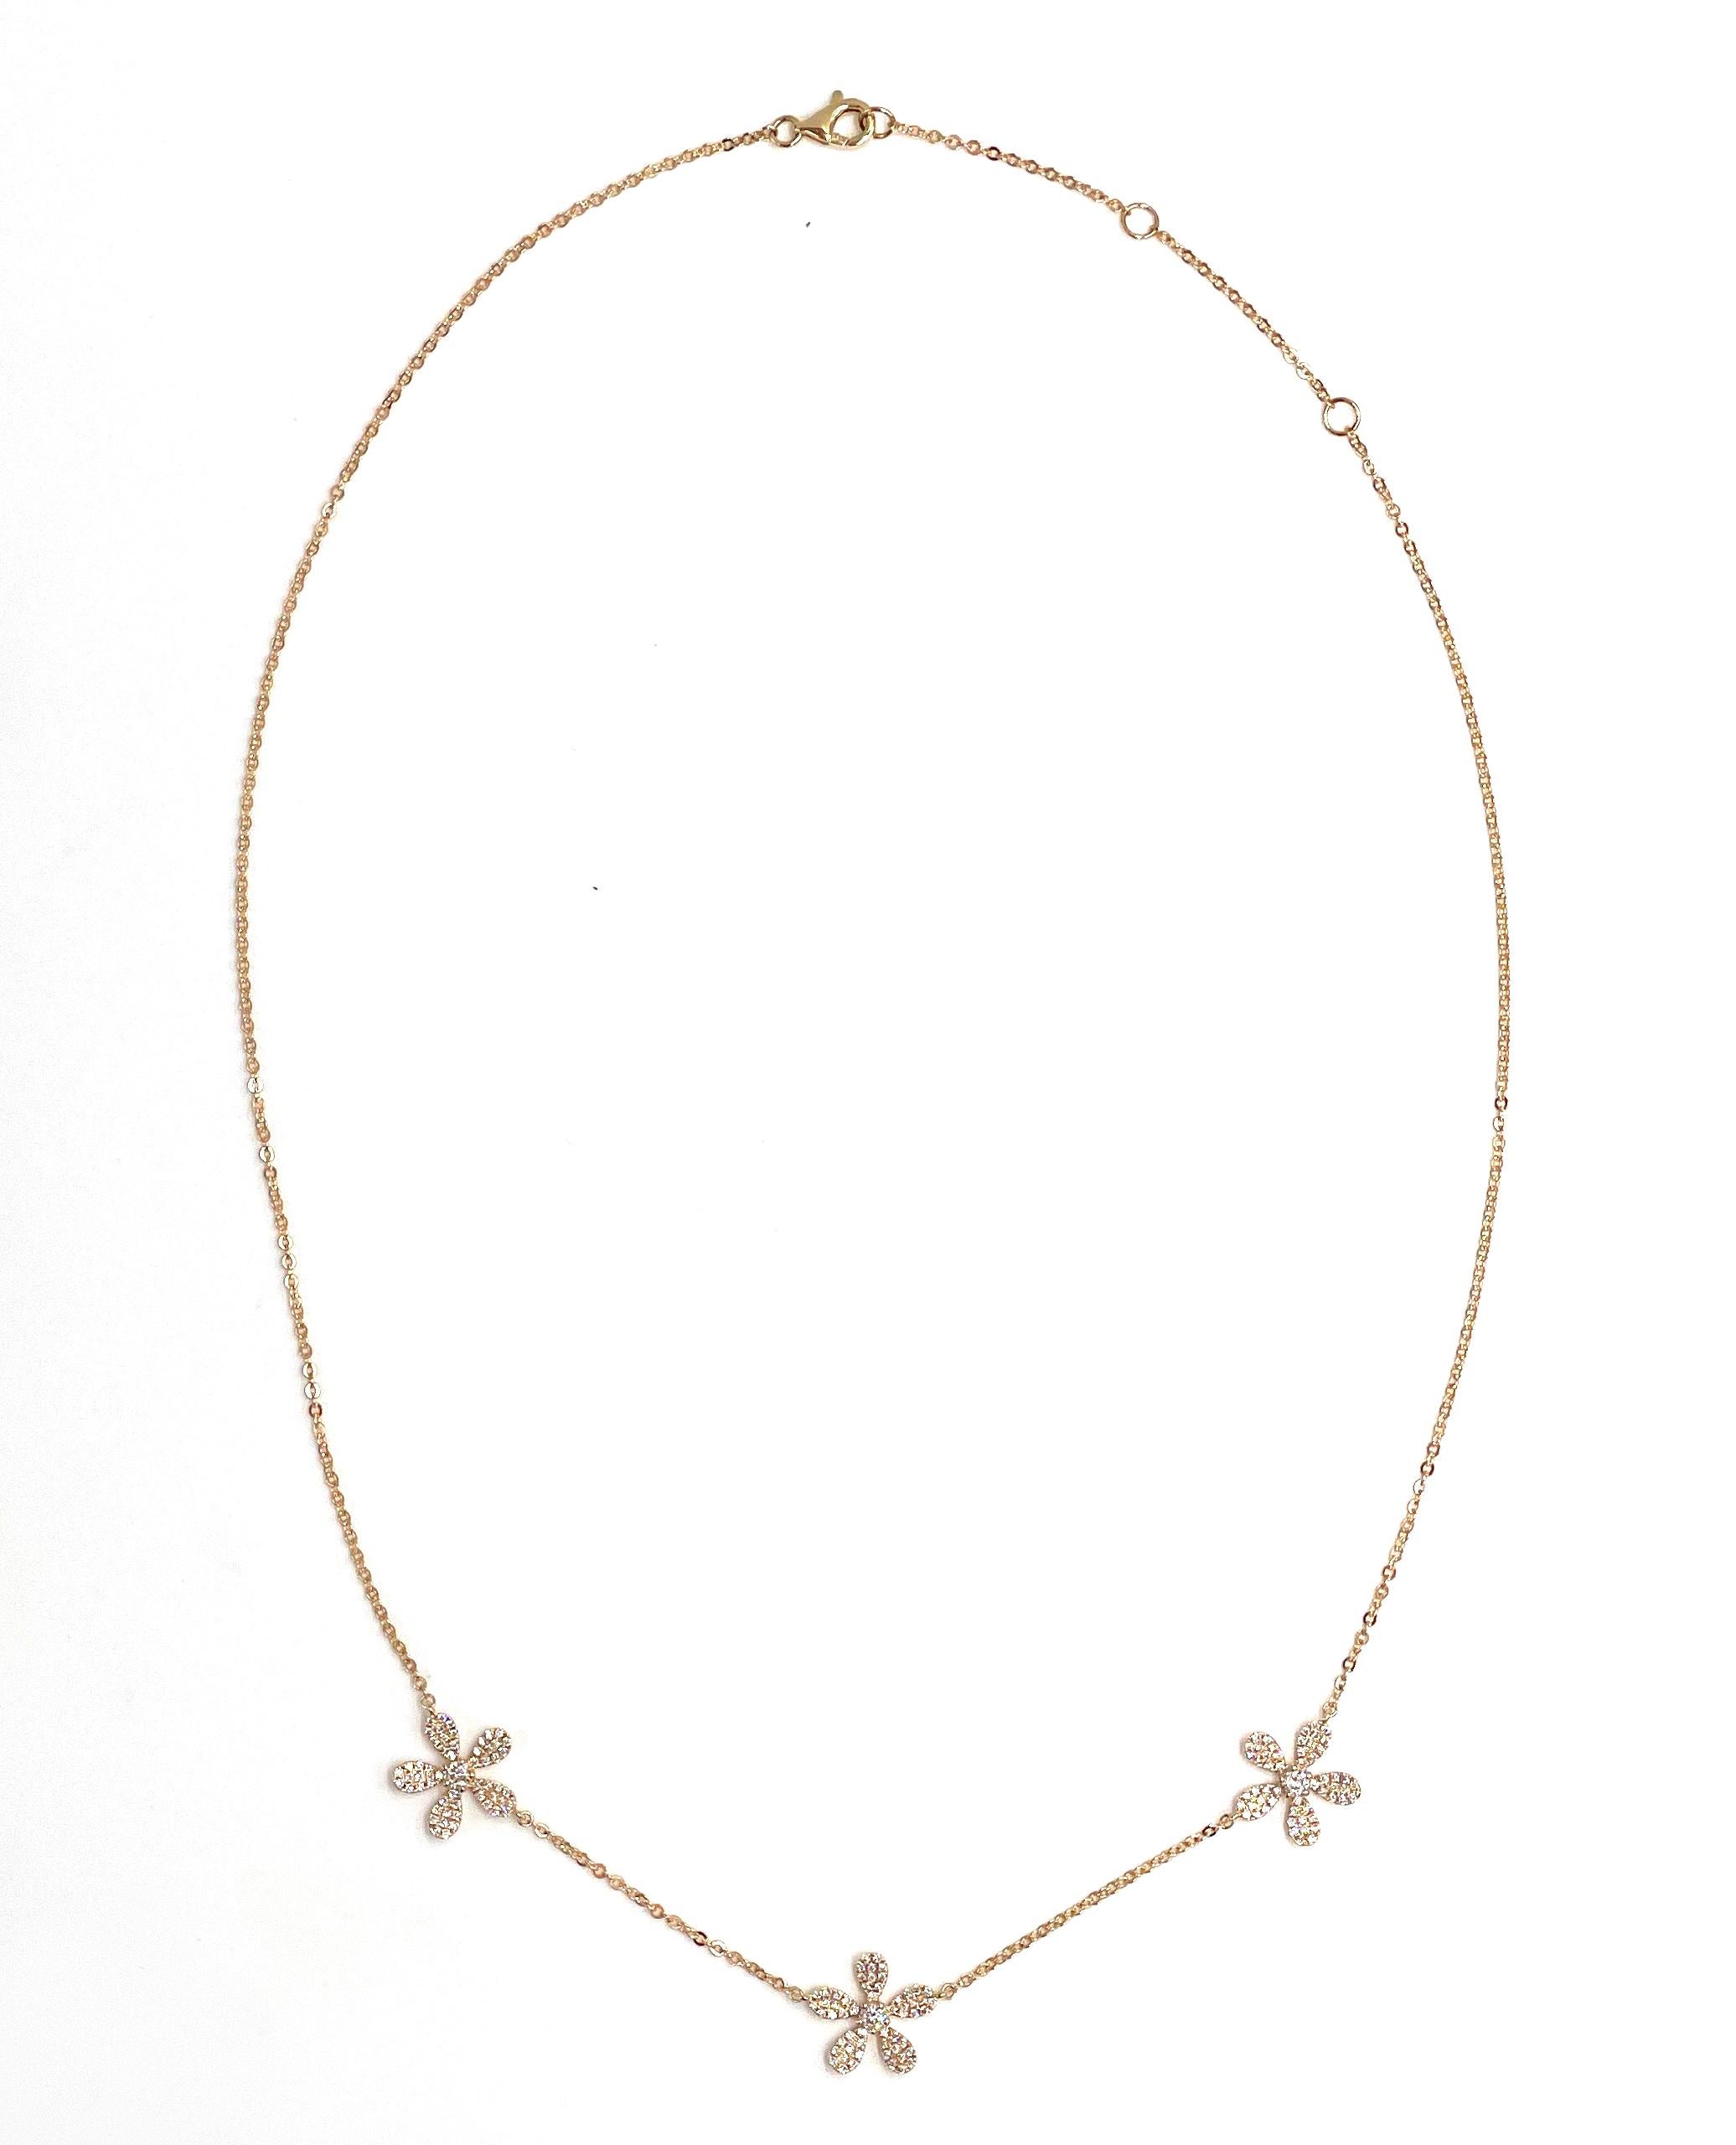 14K yellow gold flower necklace with 0.62 carat diamonds. 

- Can be worn 16, 17 or 18 inches long.